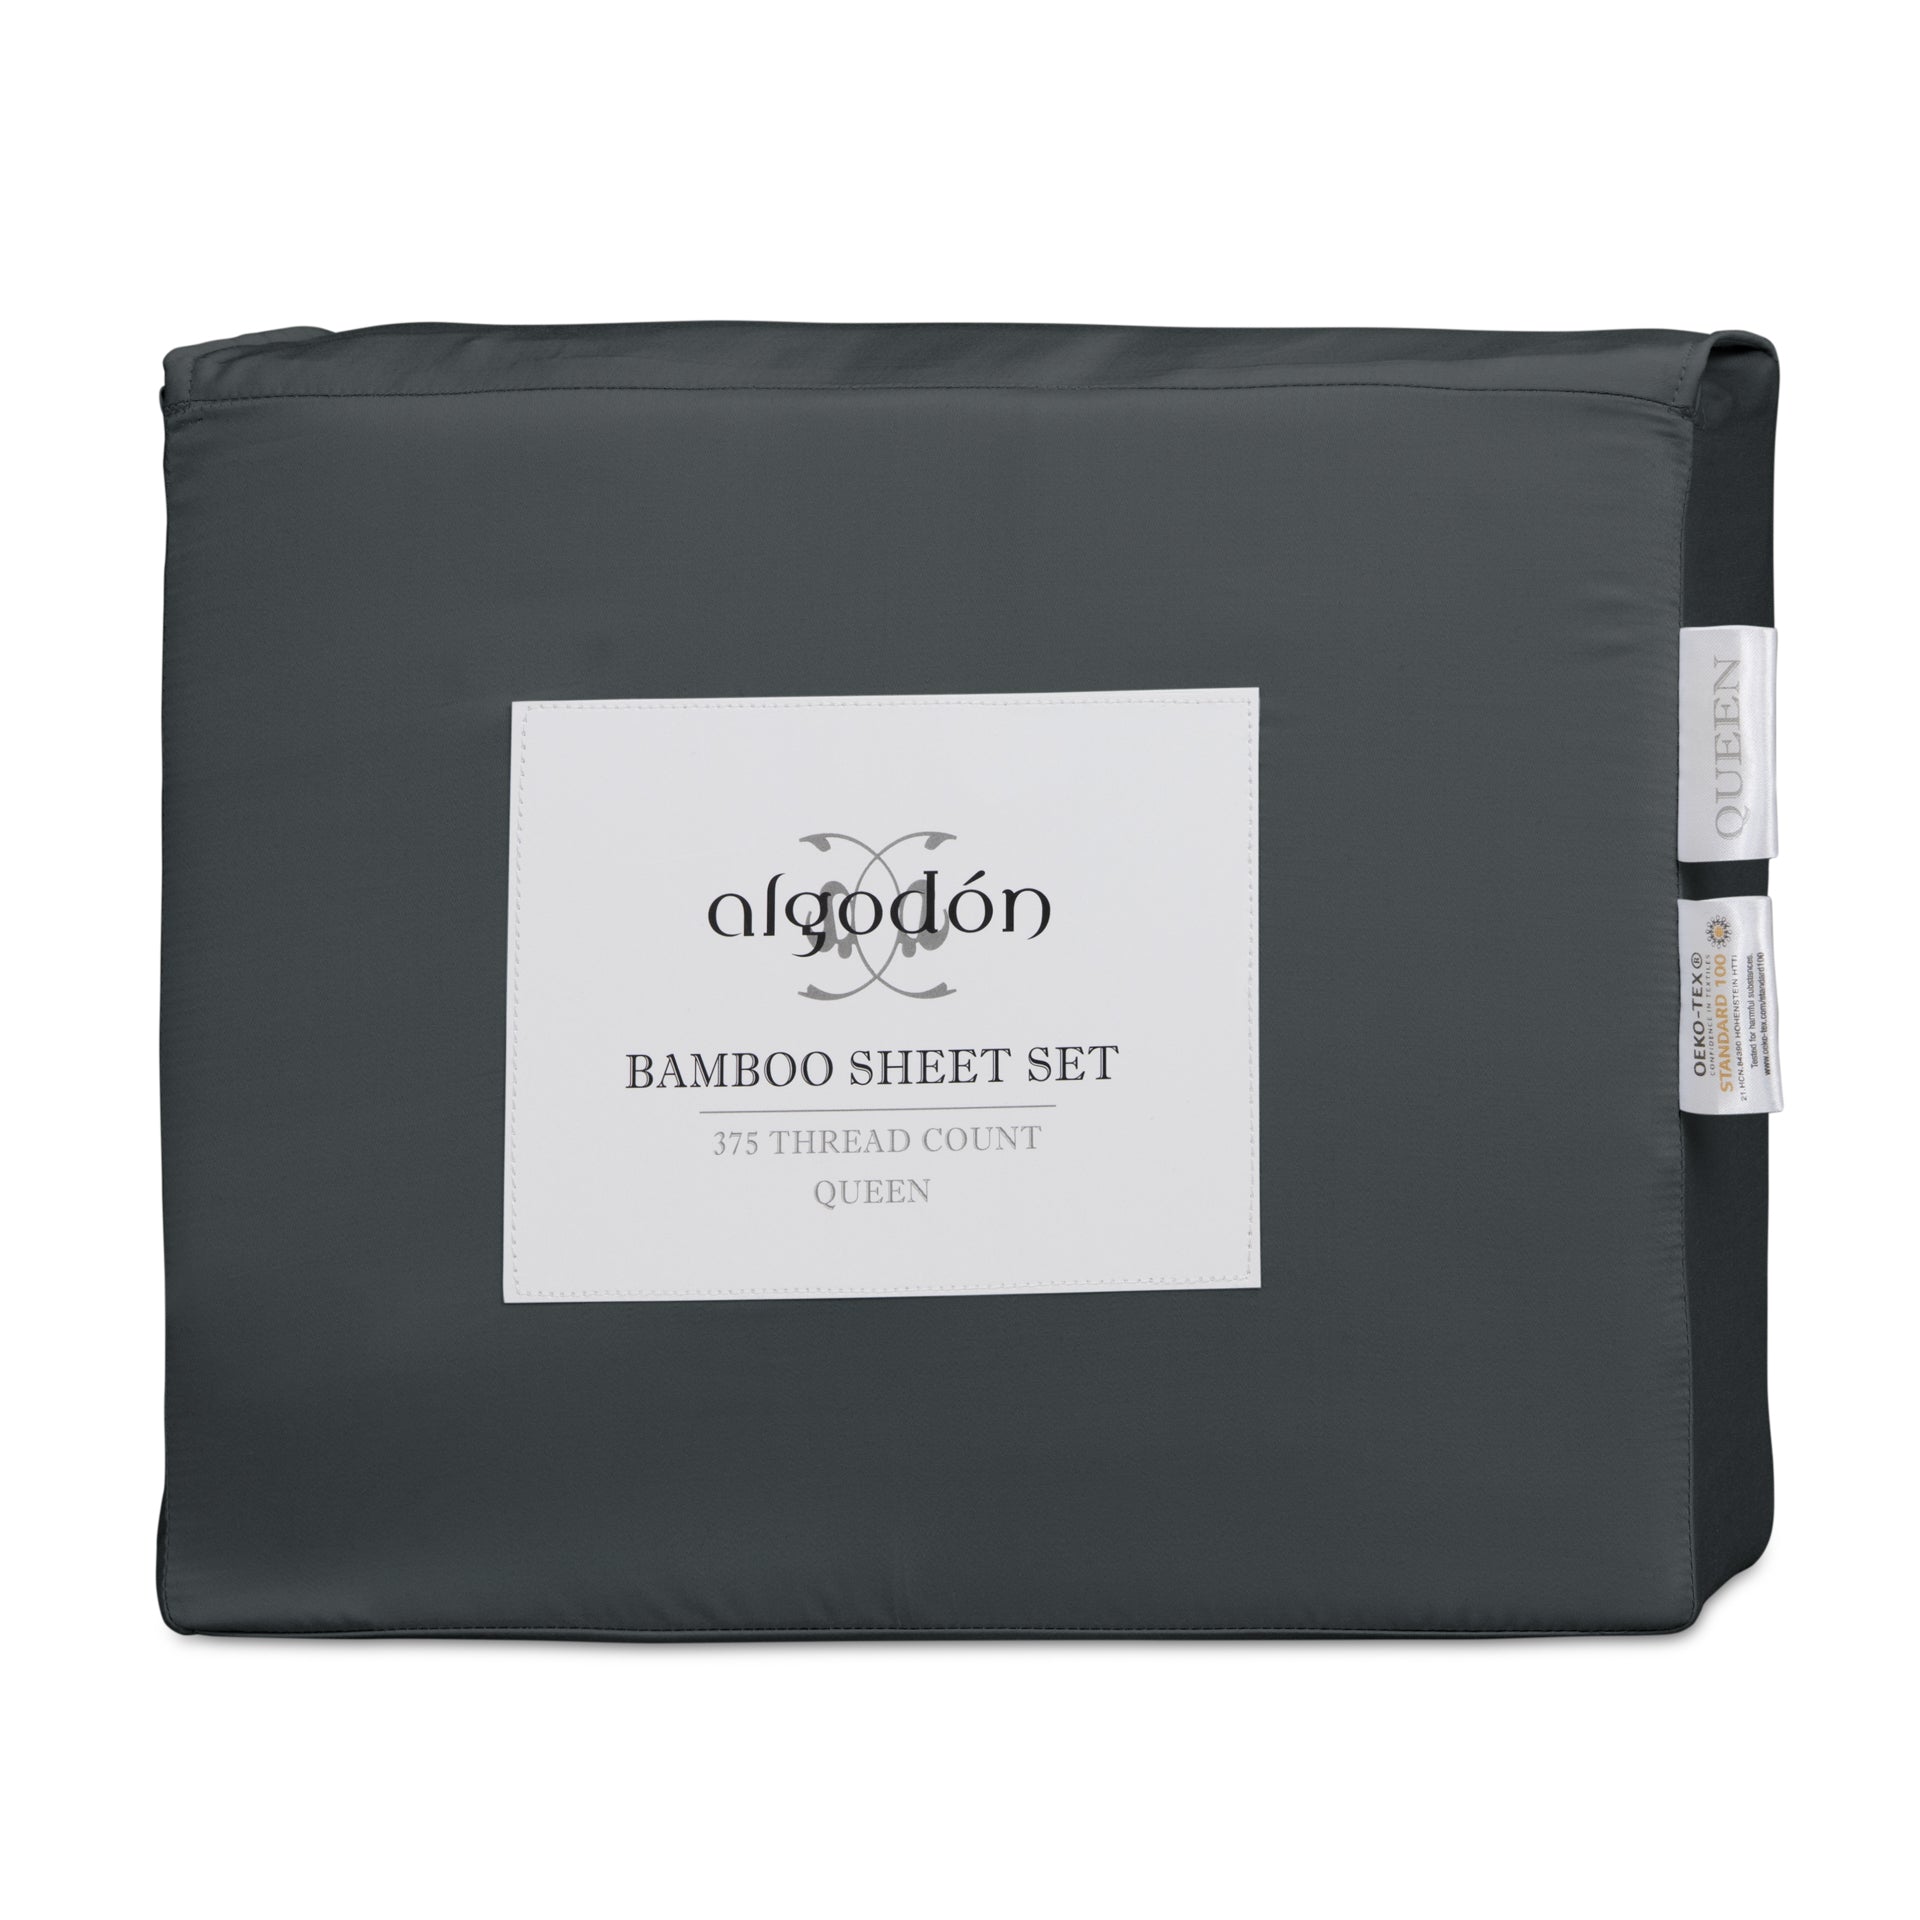 Algodon Bamboo Sheet Sets are supremely soft and silky. Bamboo sheets are ideal for sensitive skin featuring hypoallergenic properties and natural resistance to odours, allowing the skin to breathe. 